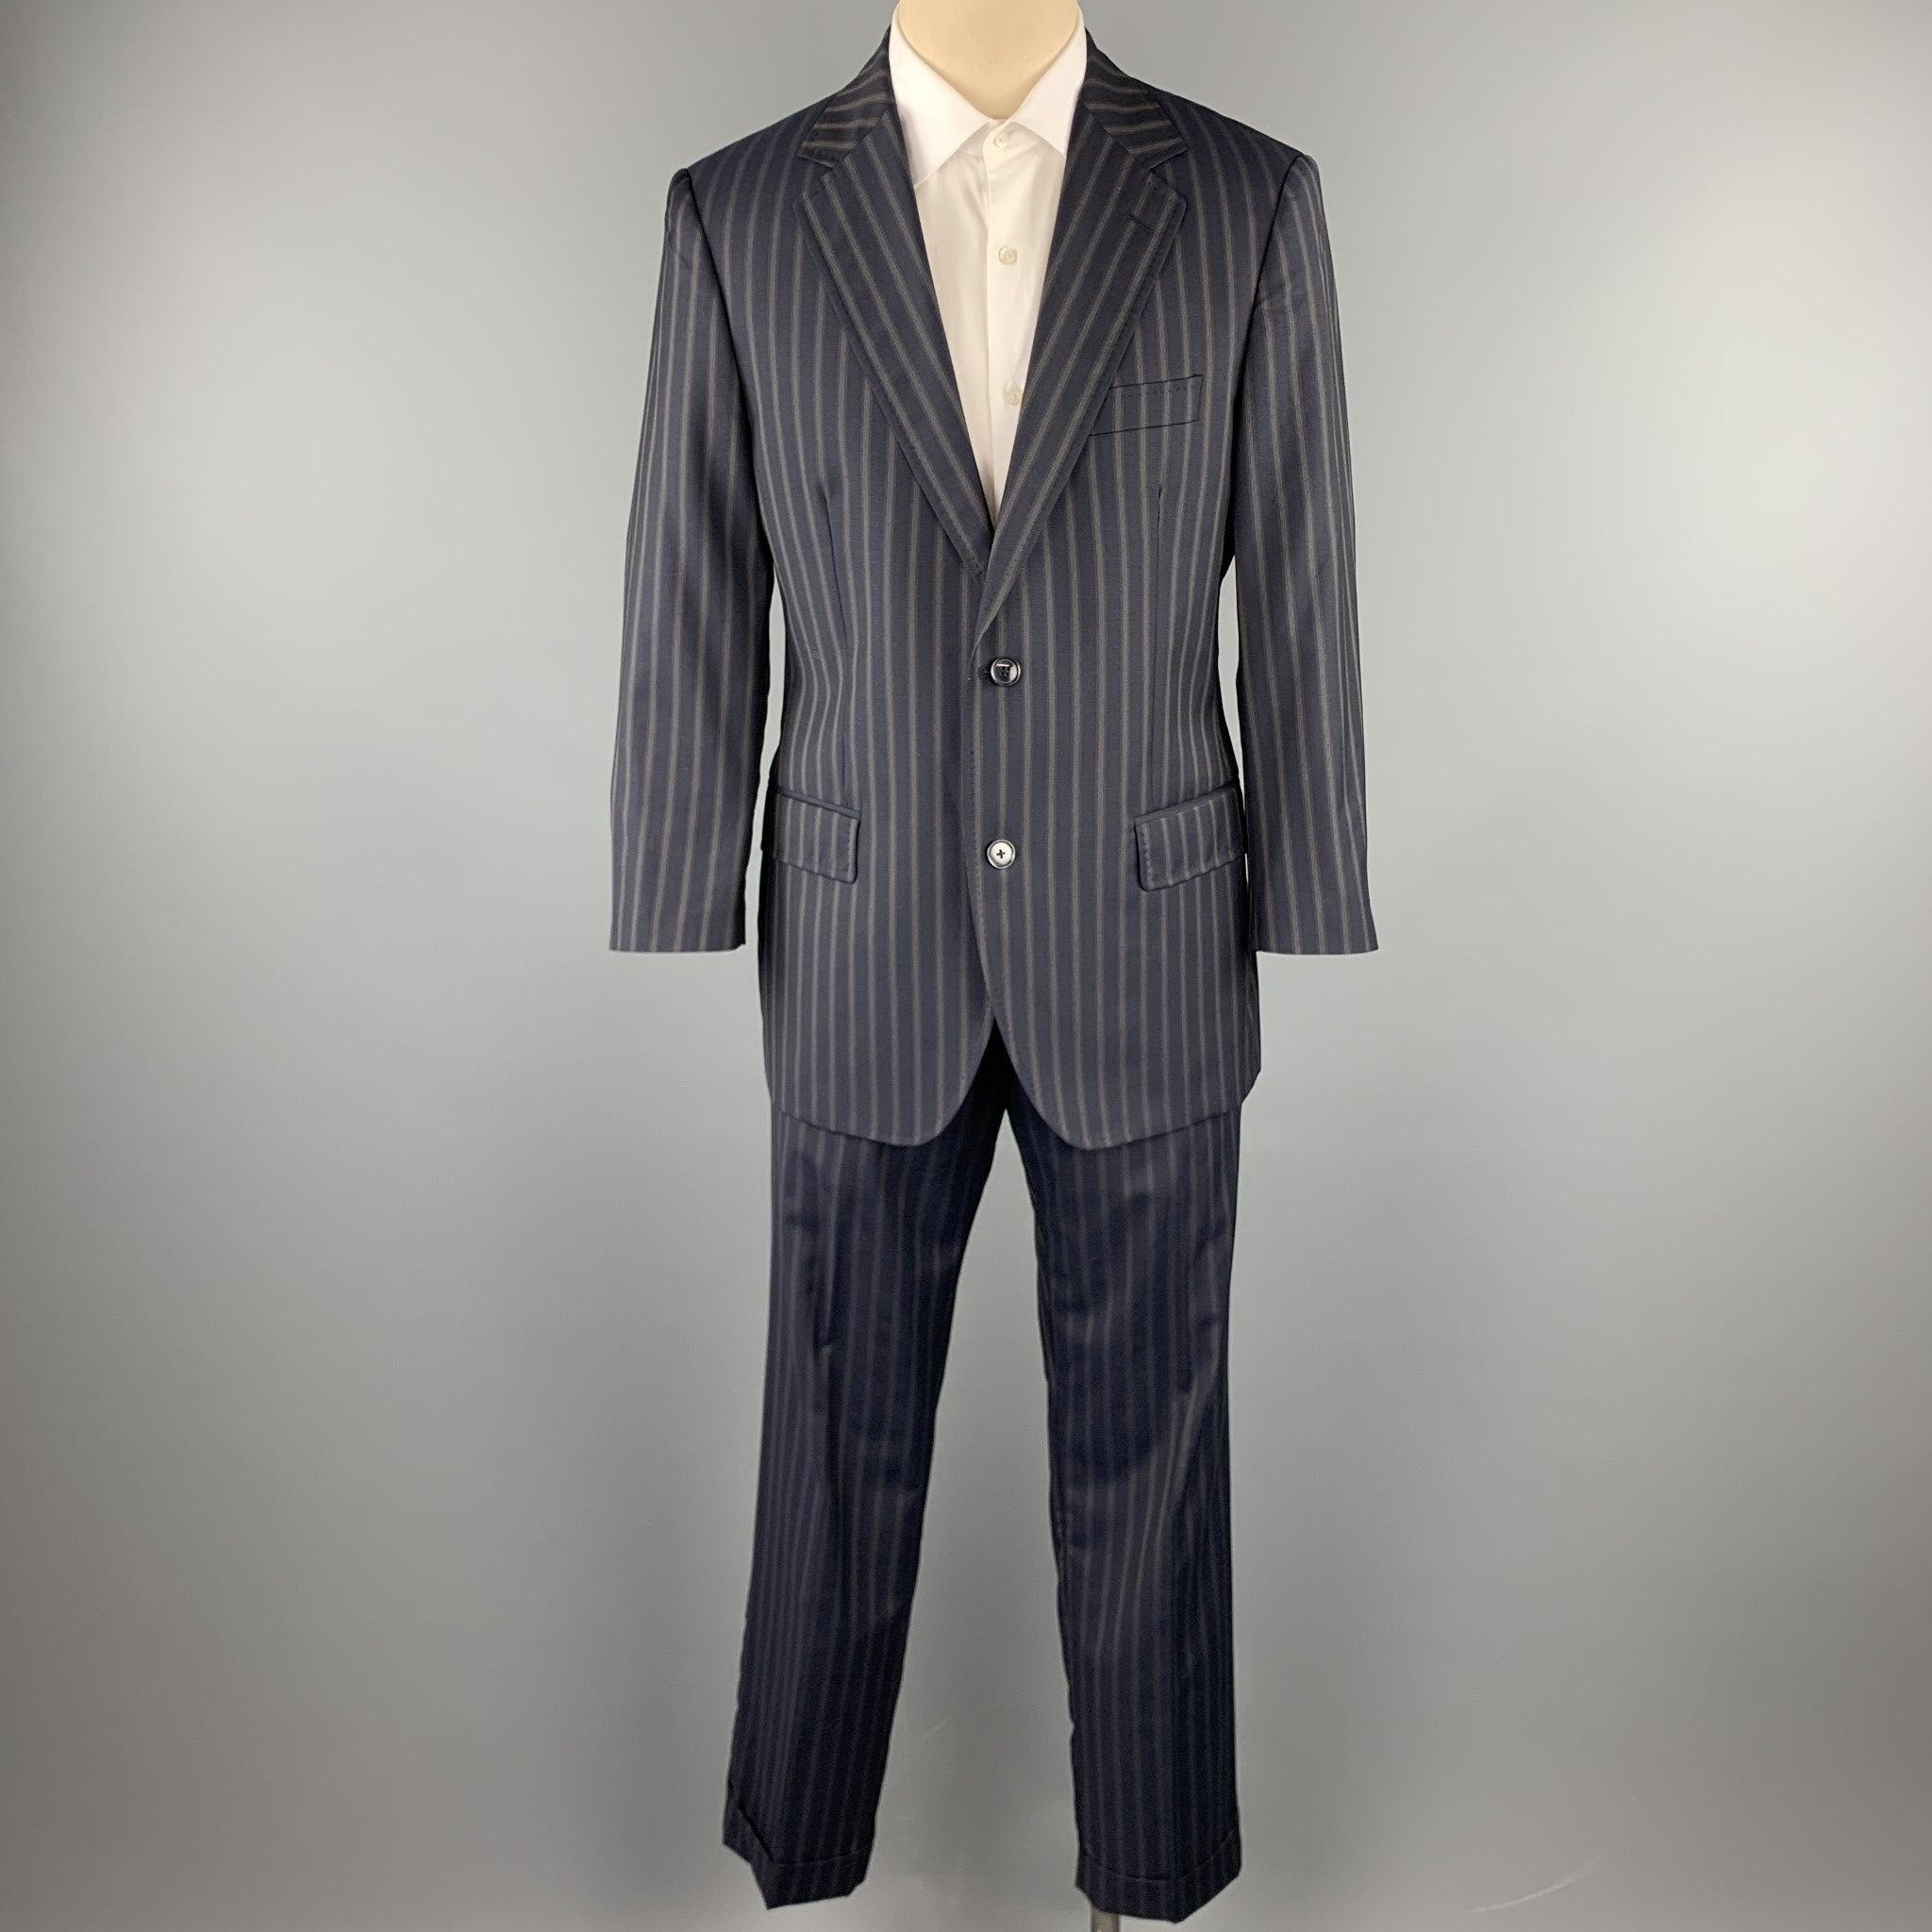 DOLCE & GABBANA suit comes in a navy stripe wool with a monogram liner and includes a single breasted, two button sport coat with a notch lapel and matching
 pleated cuff front trousers. 
Made in Italy.Excellent Pre-Owned Condition. 

Marked:   IT